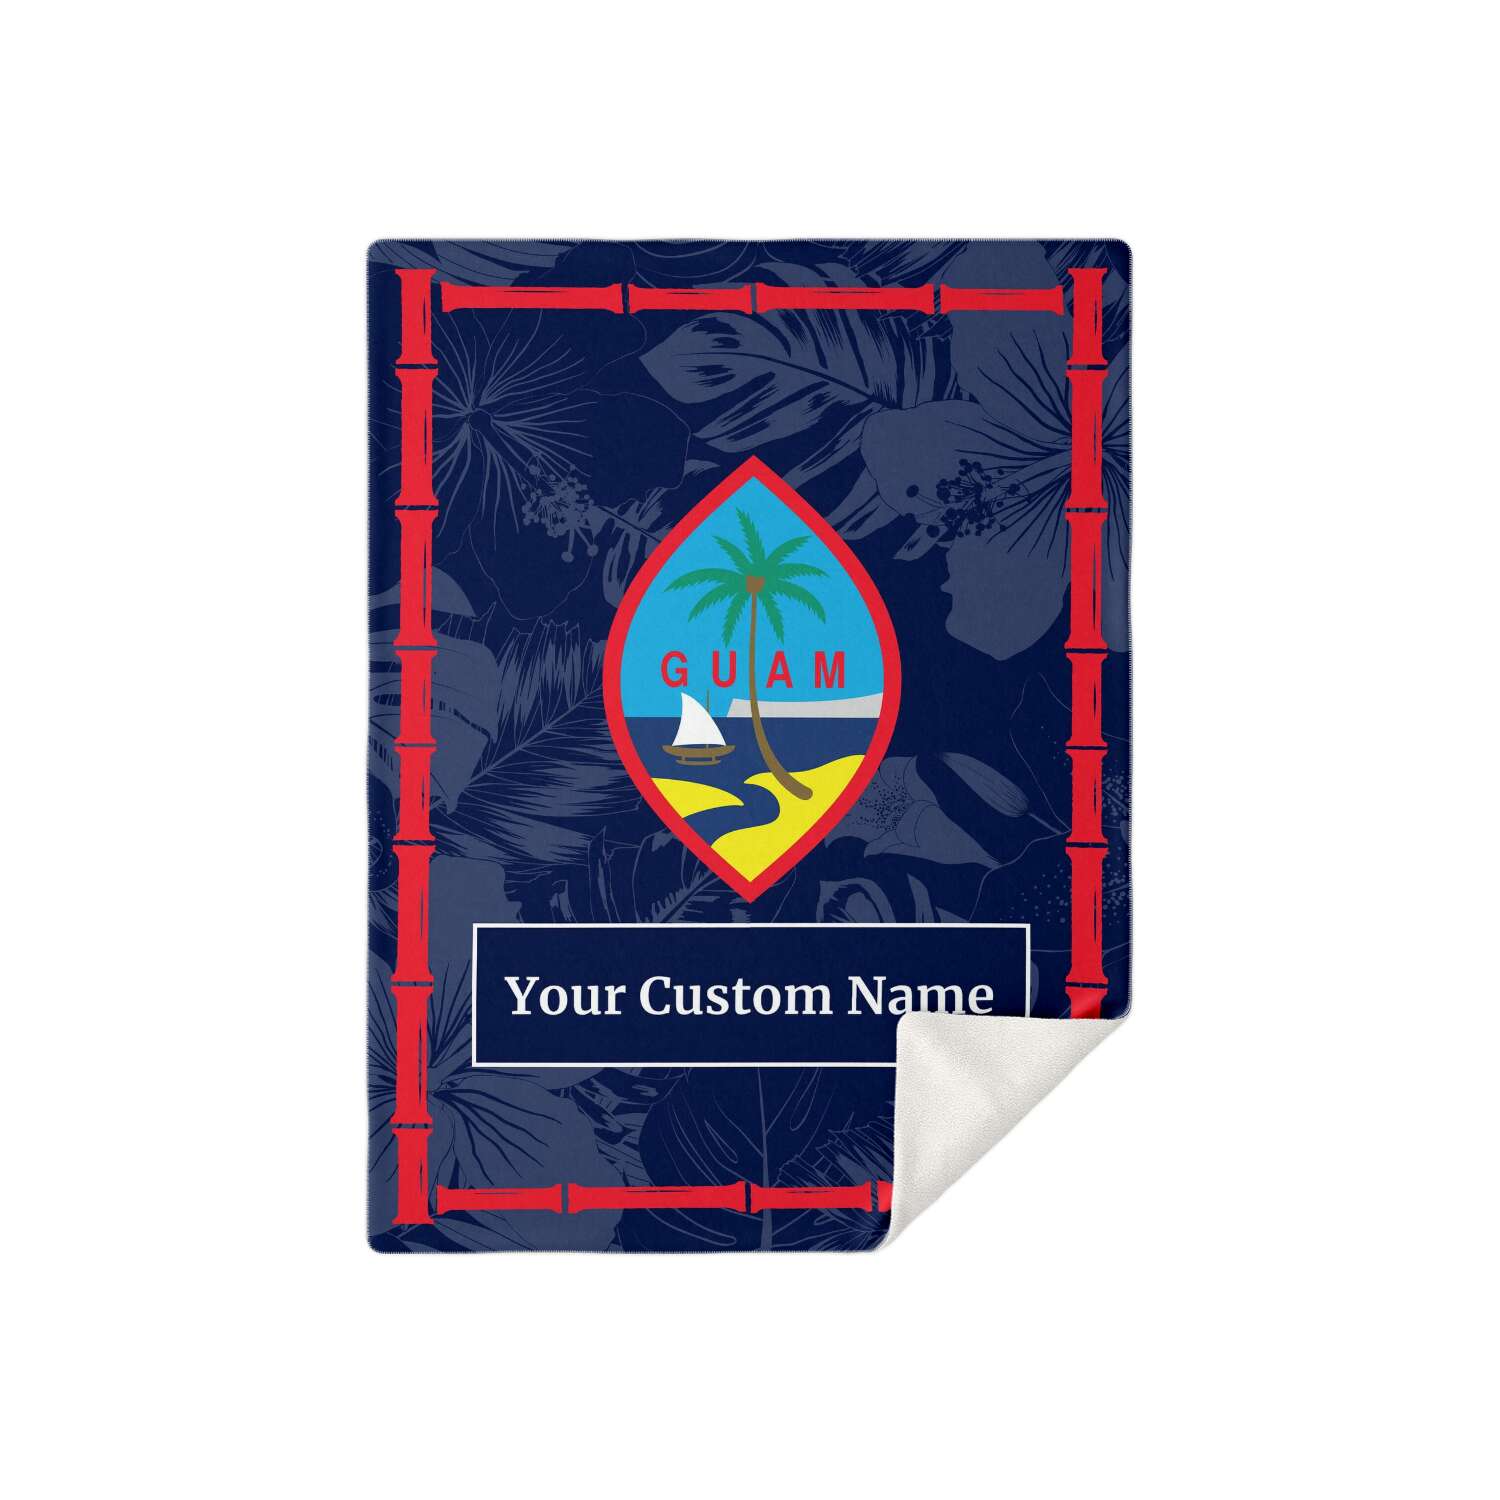 Guam Flag Bamboo Microfleece Blanket with Personalization